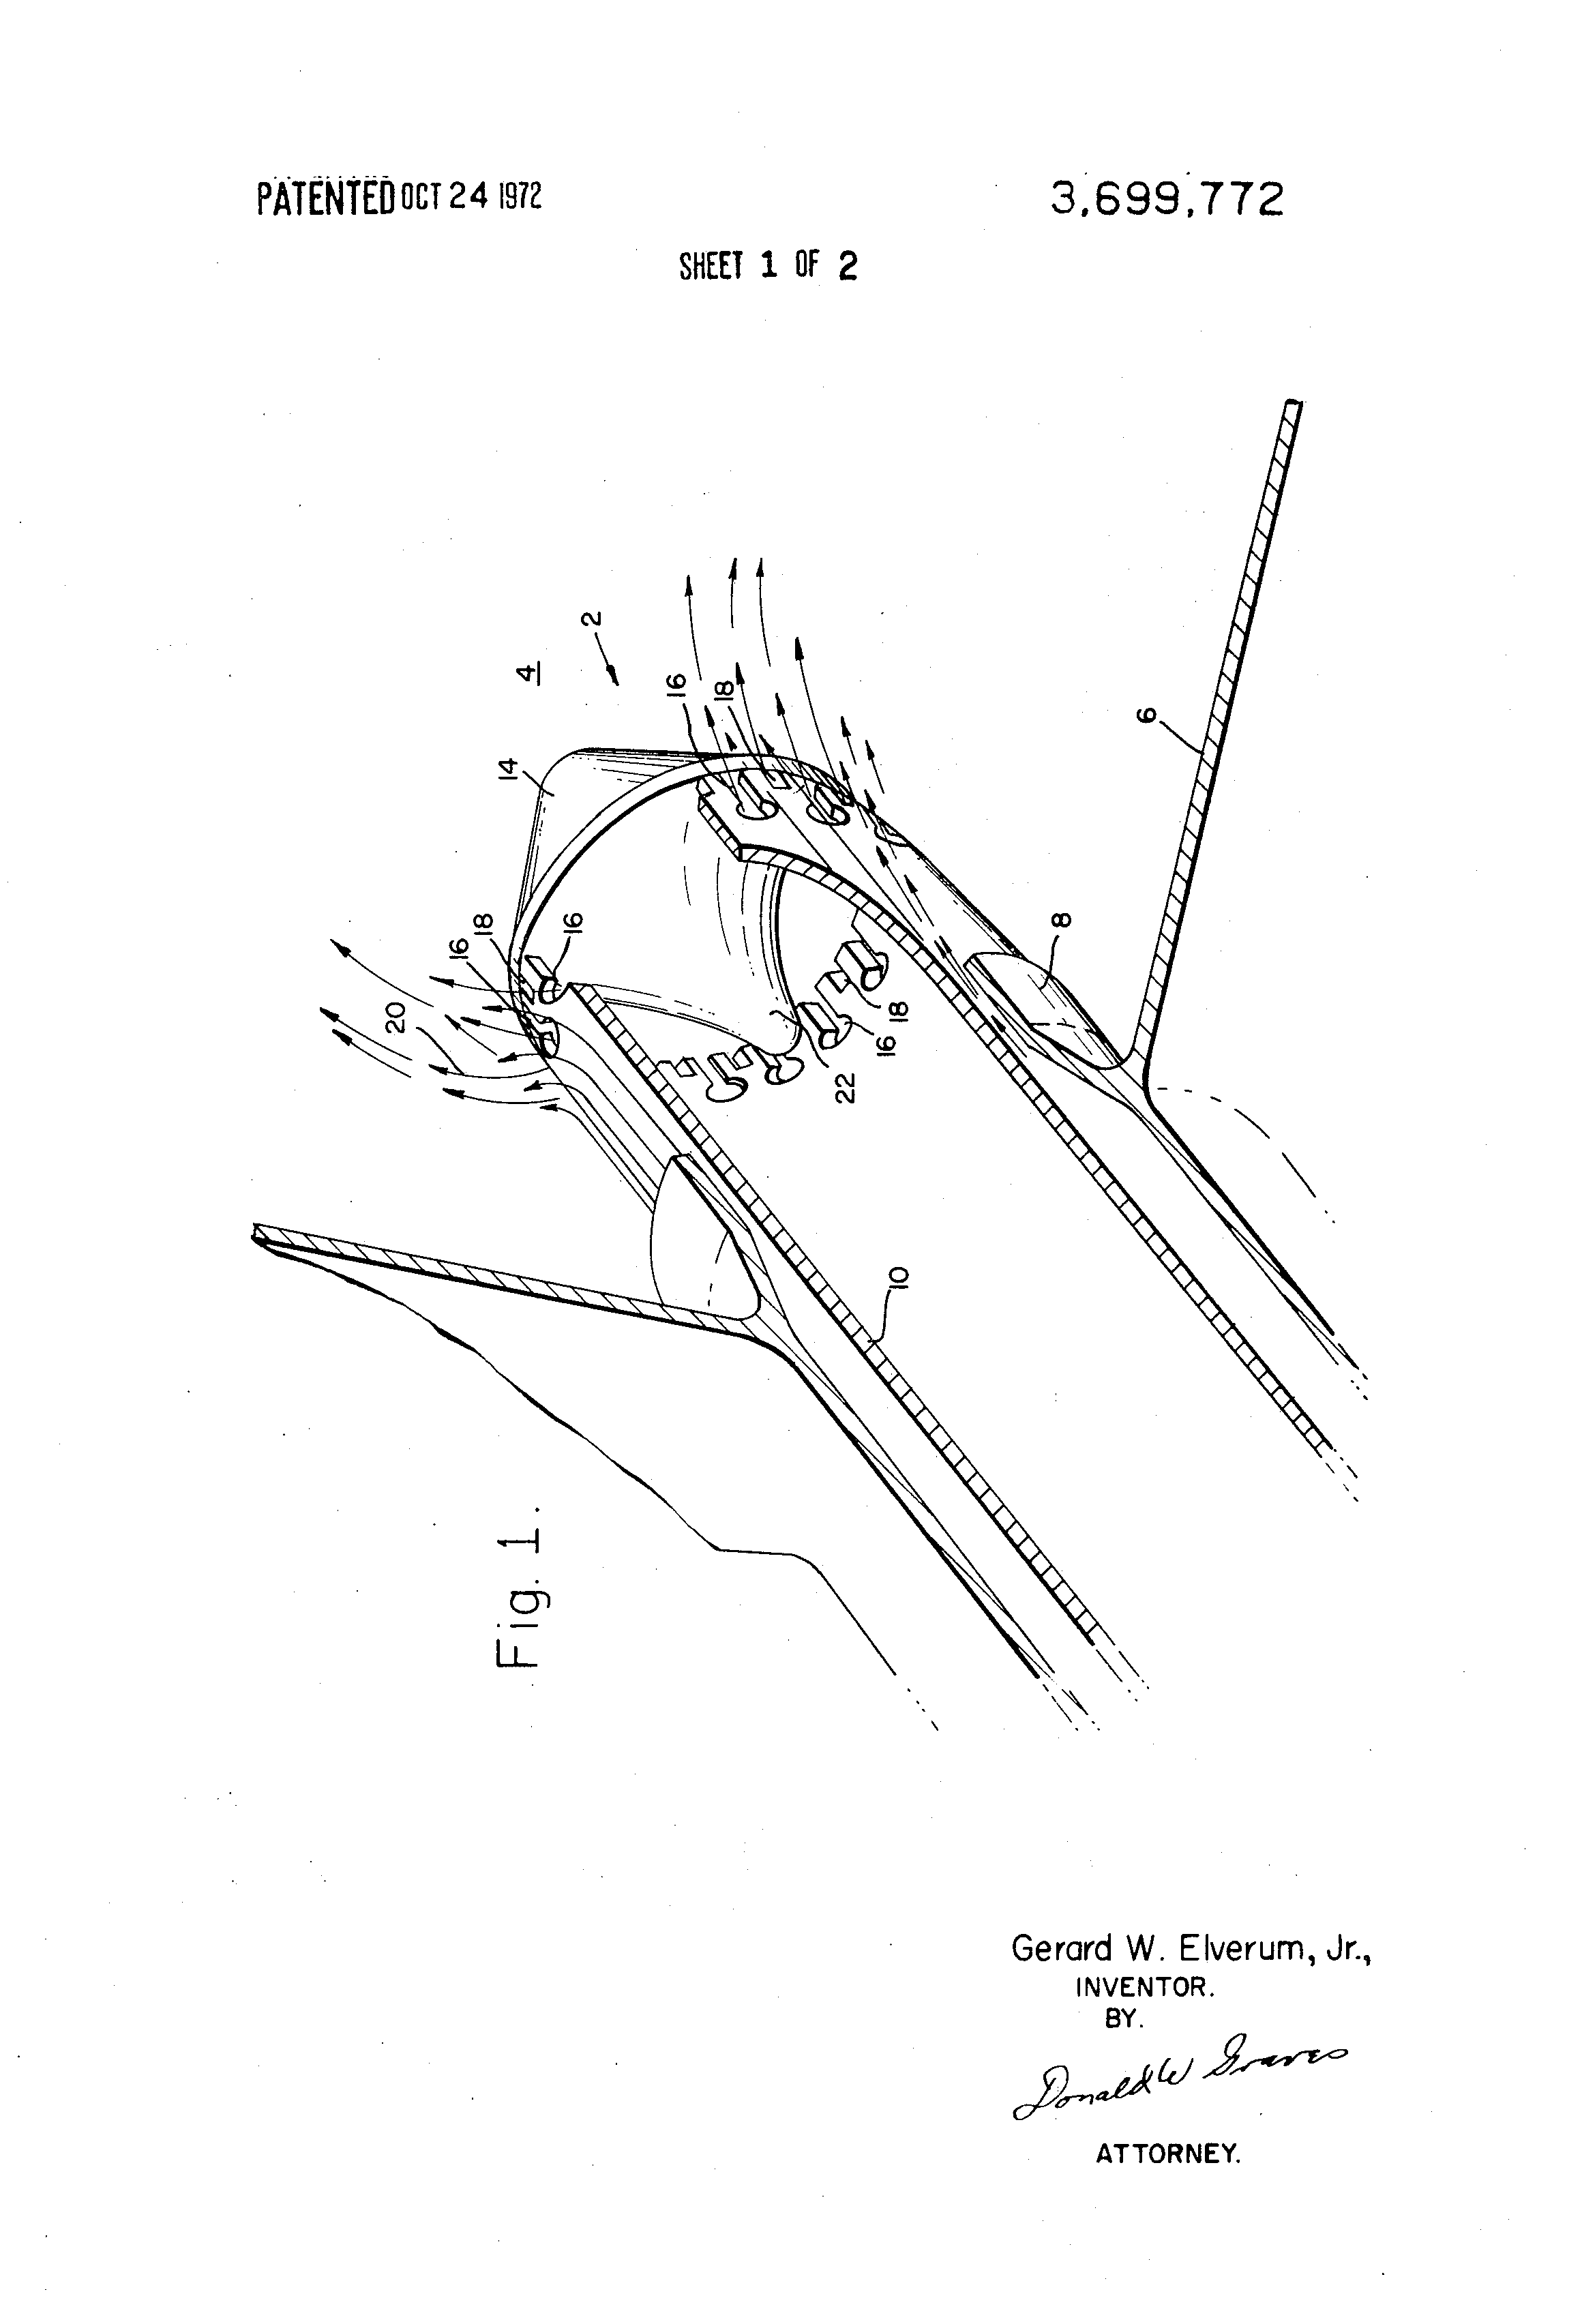 A diagram of the damage